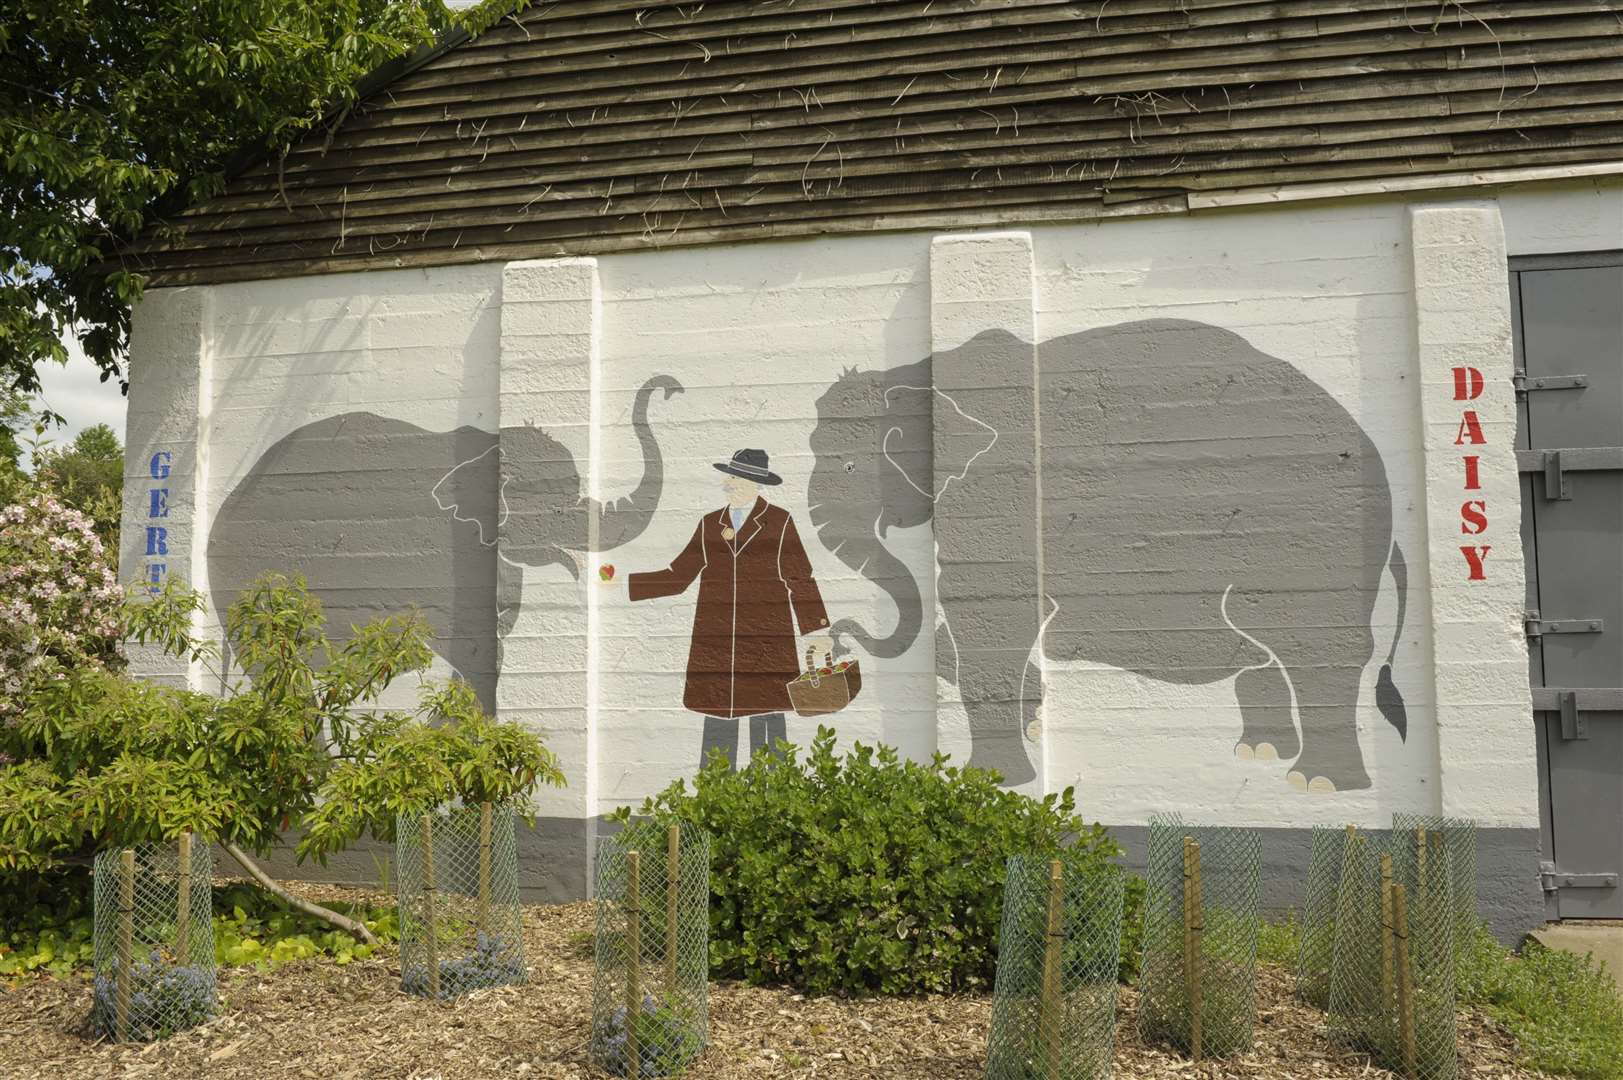 The Elephant House in Cobtree Manor Park today